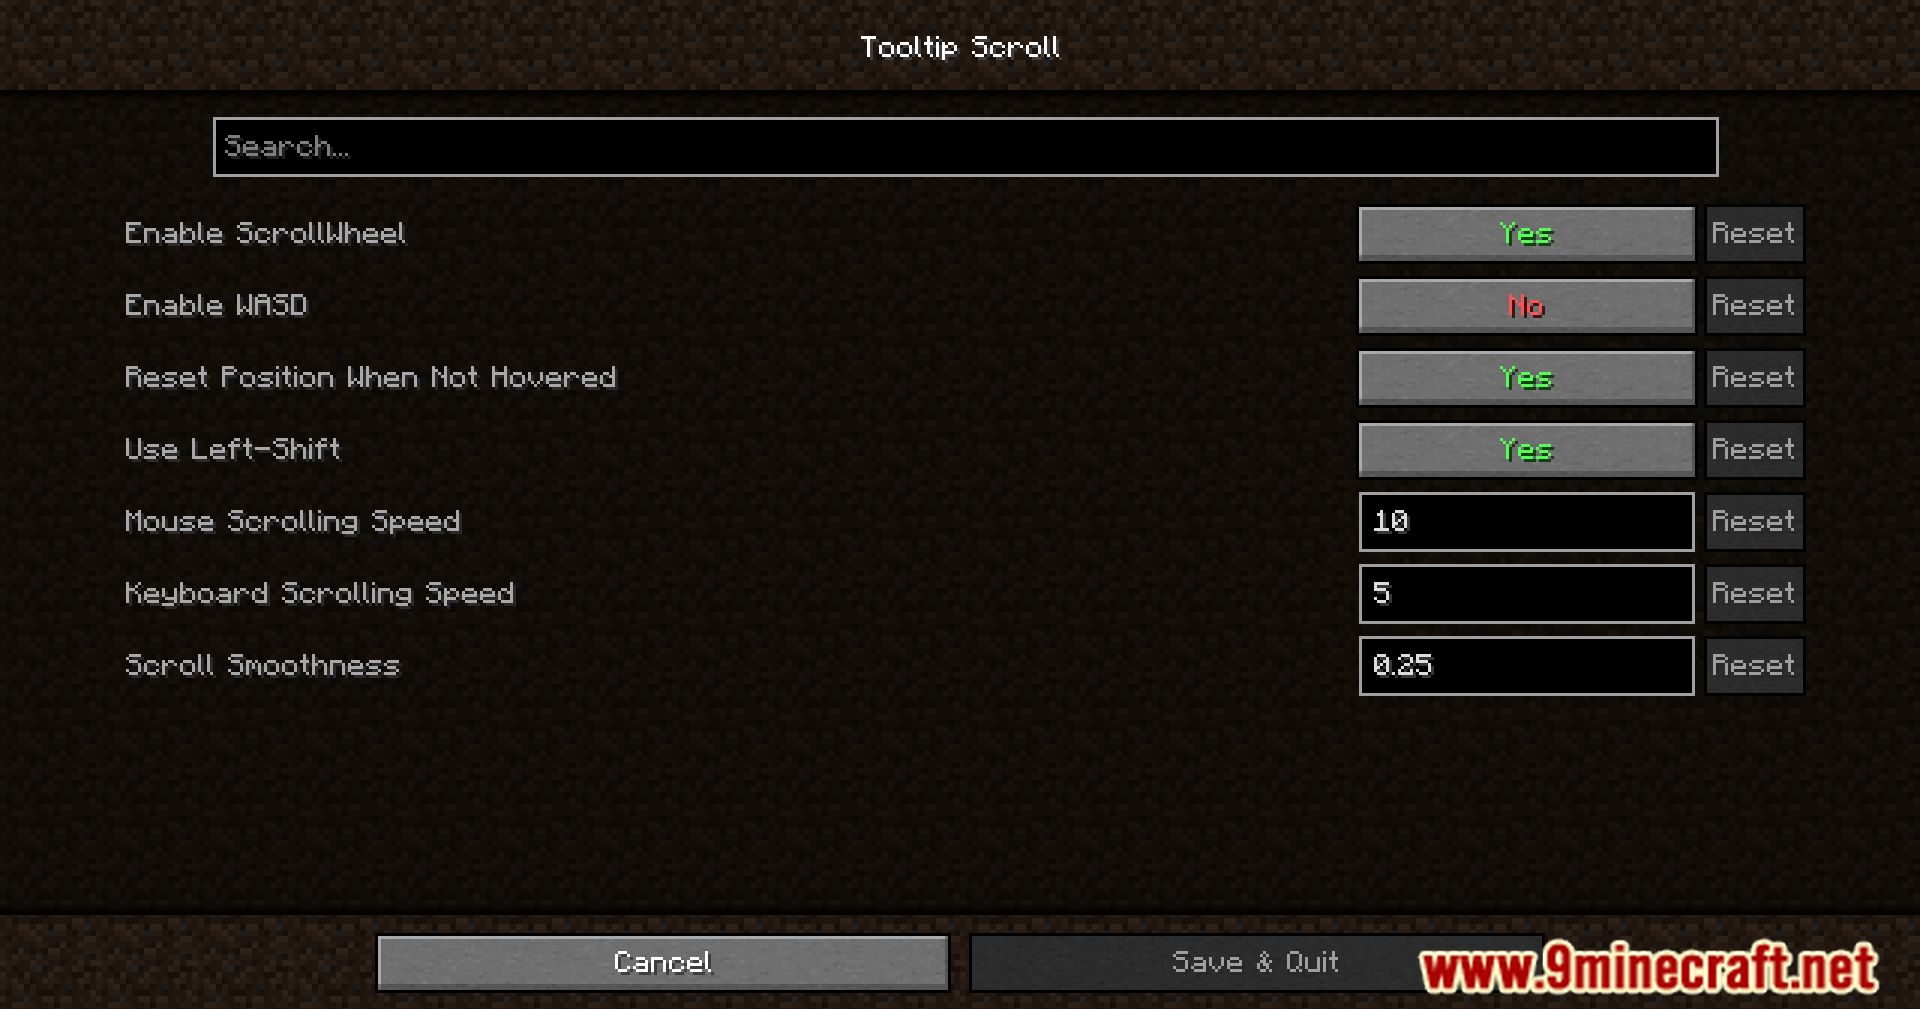 Tooltip Scroll Mod (1.21, 1.20.1) - Scroll Your Way To Clarity 3